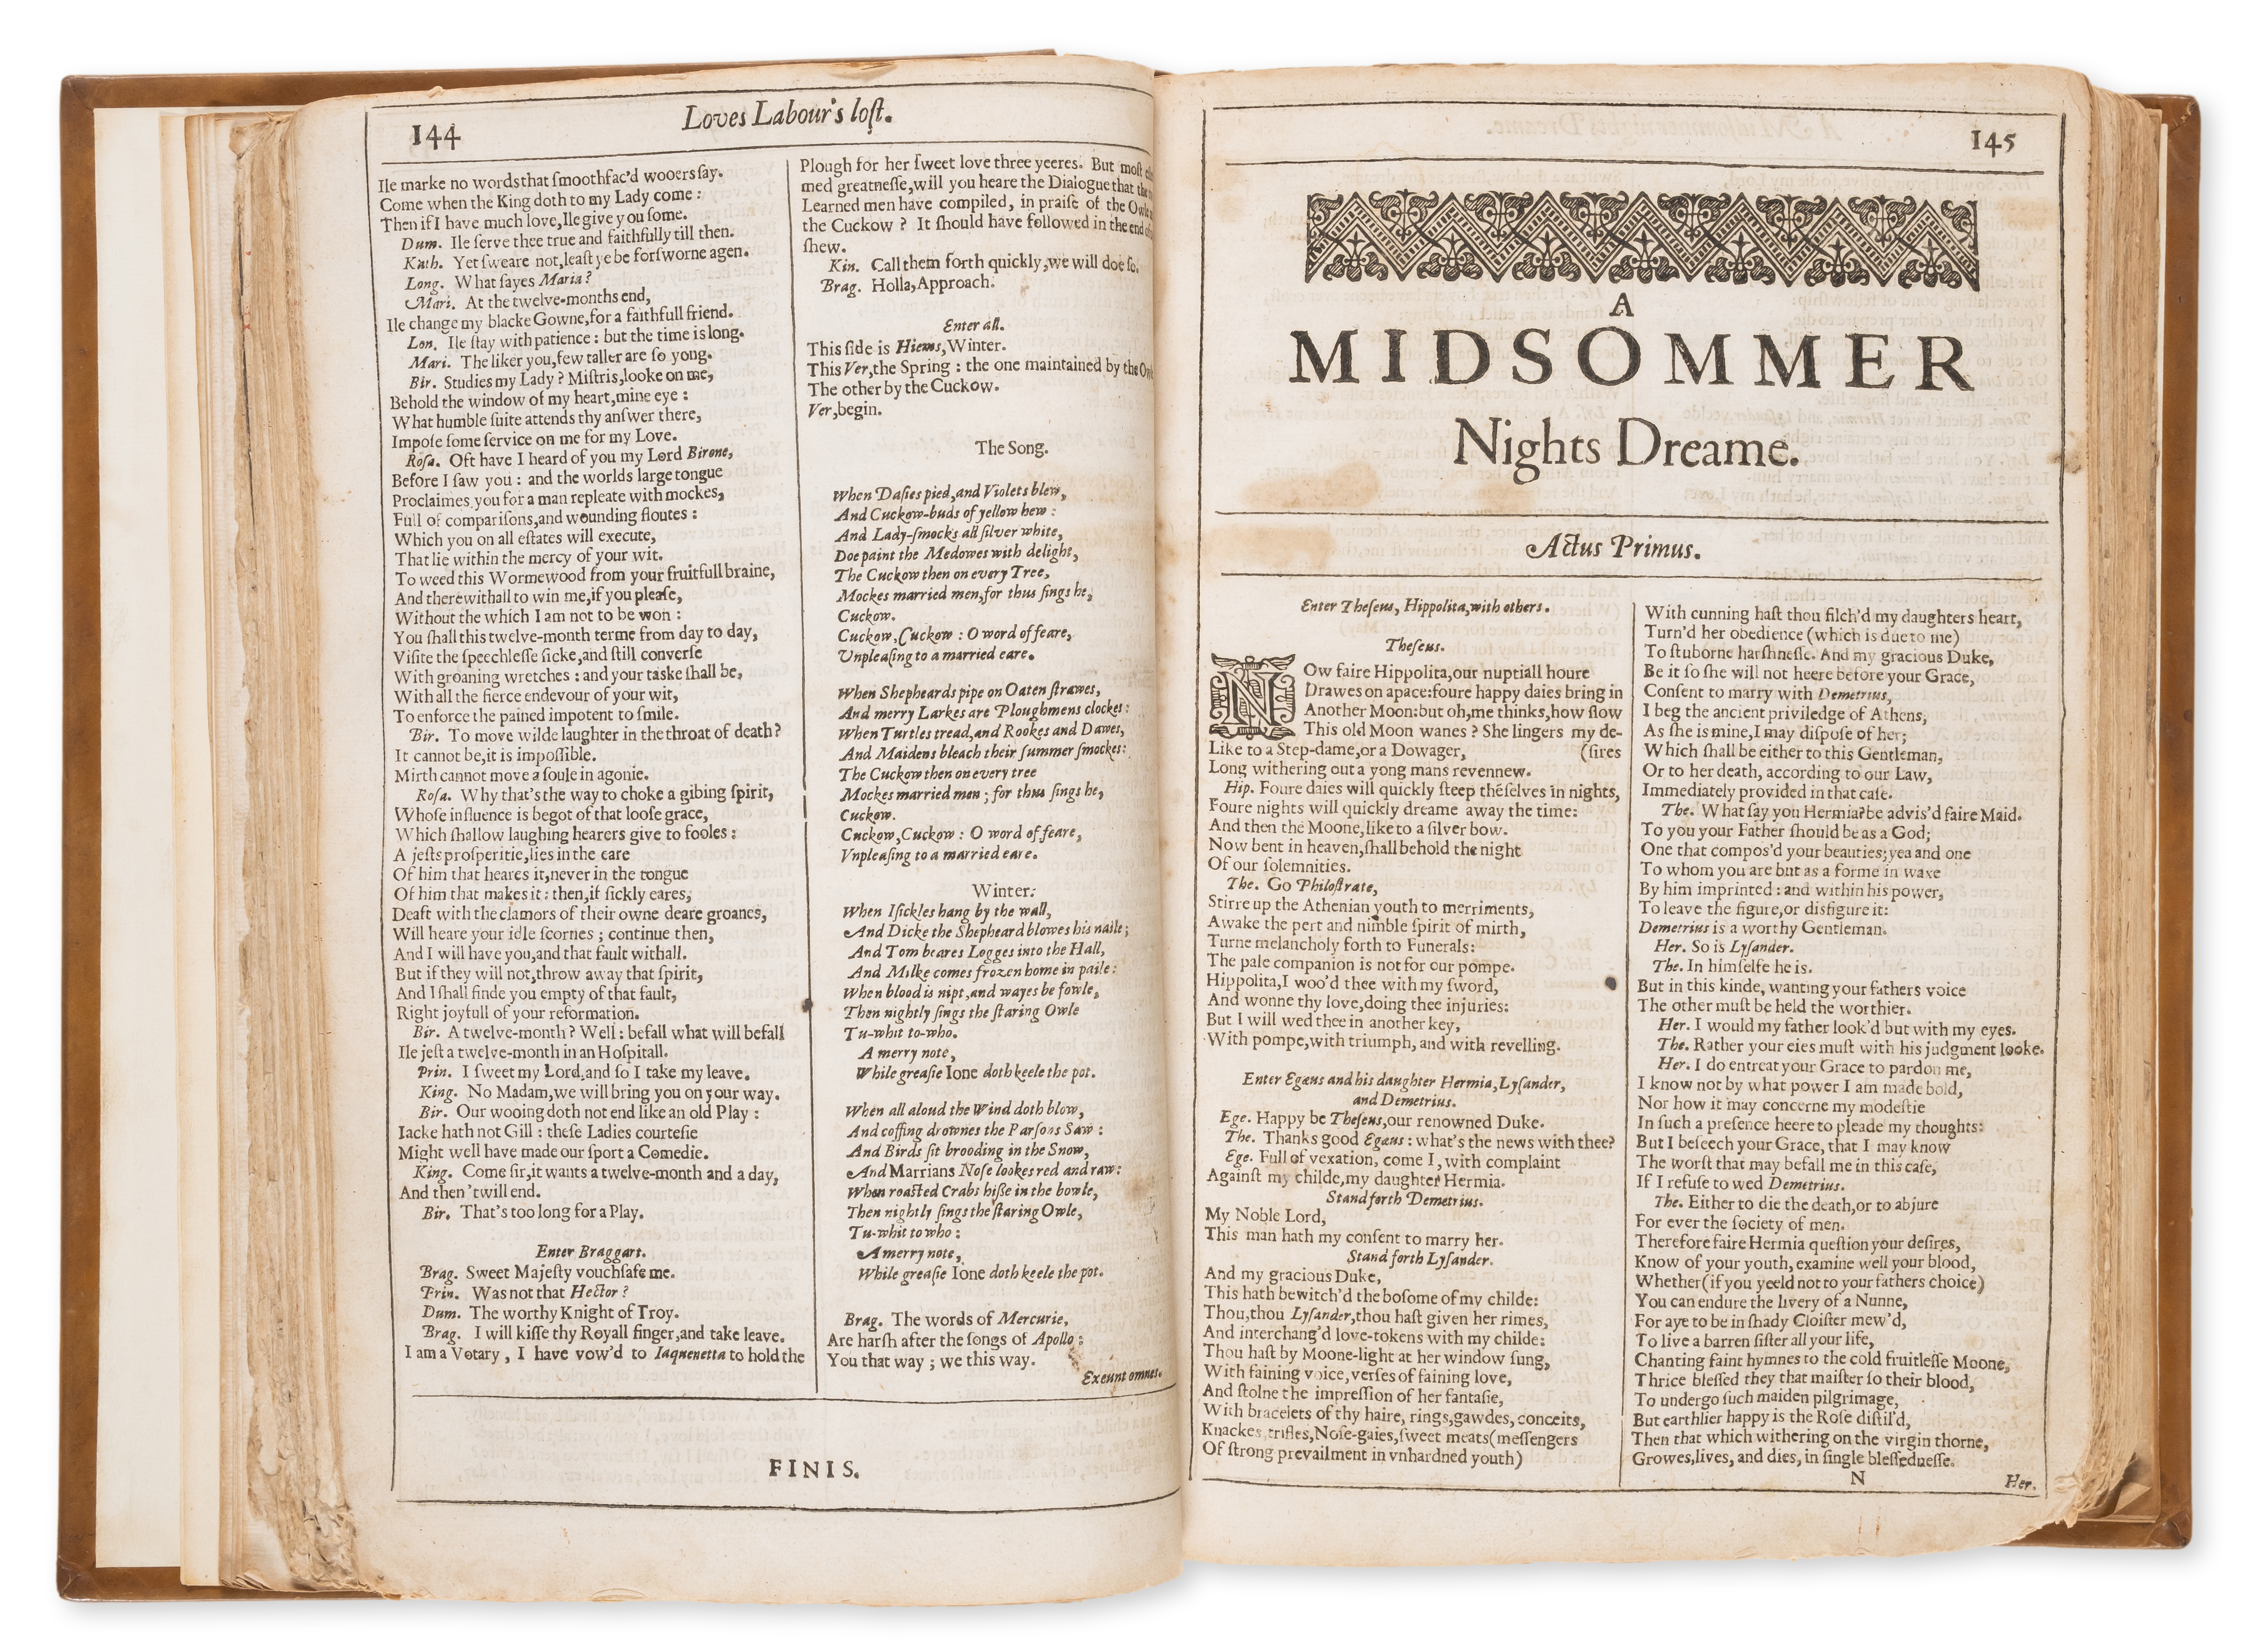 [Shakespeare (William)] [Comedies, Histories, and Tragedies], second folio edition, [by Tho.Cotes... - Image 5 of 5